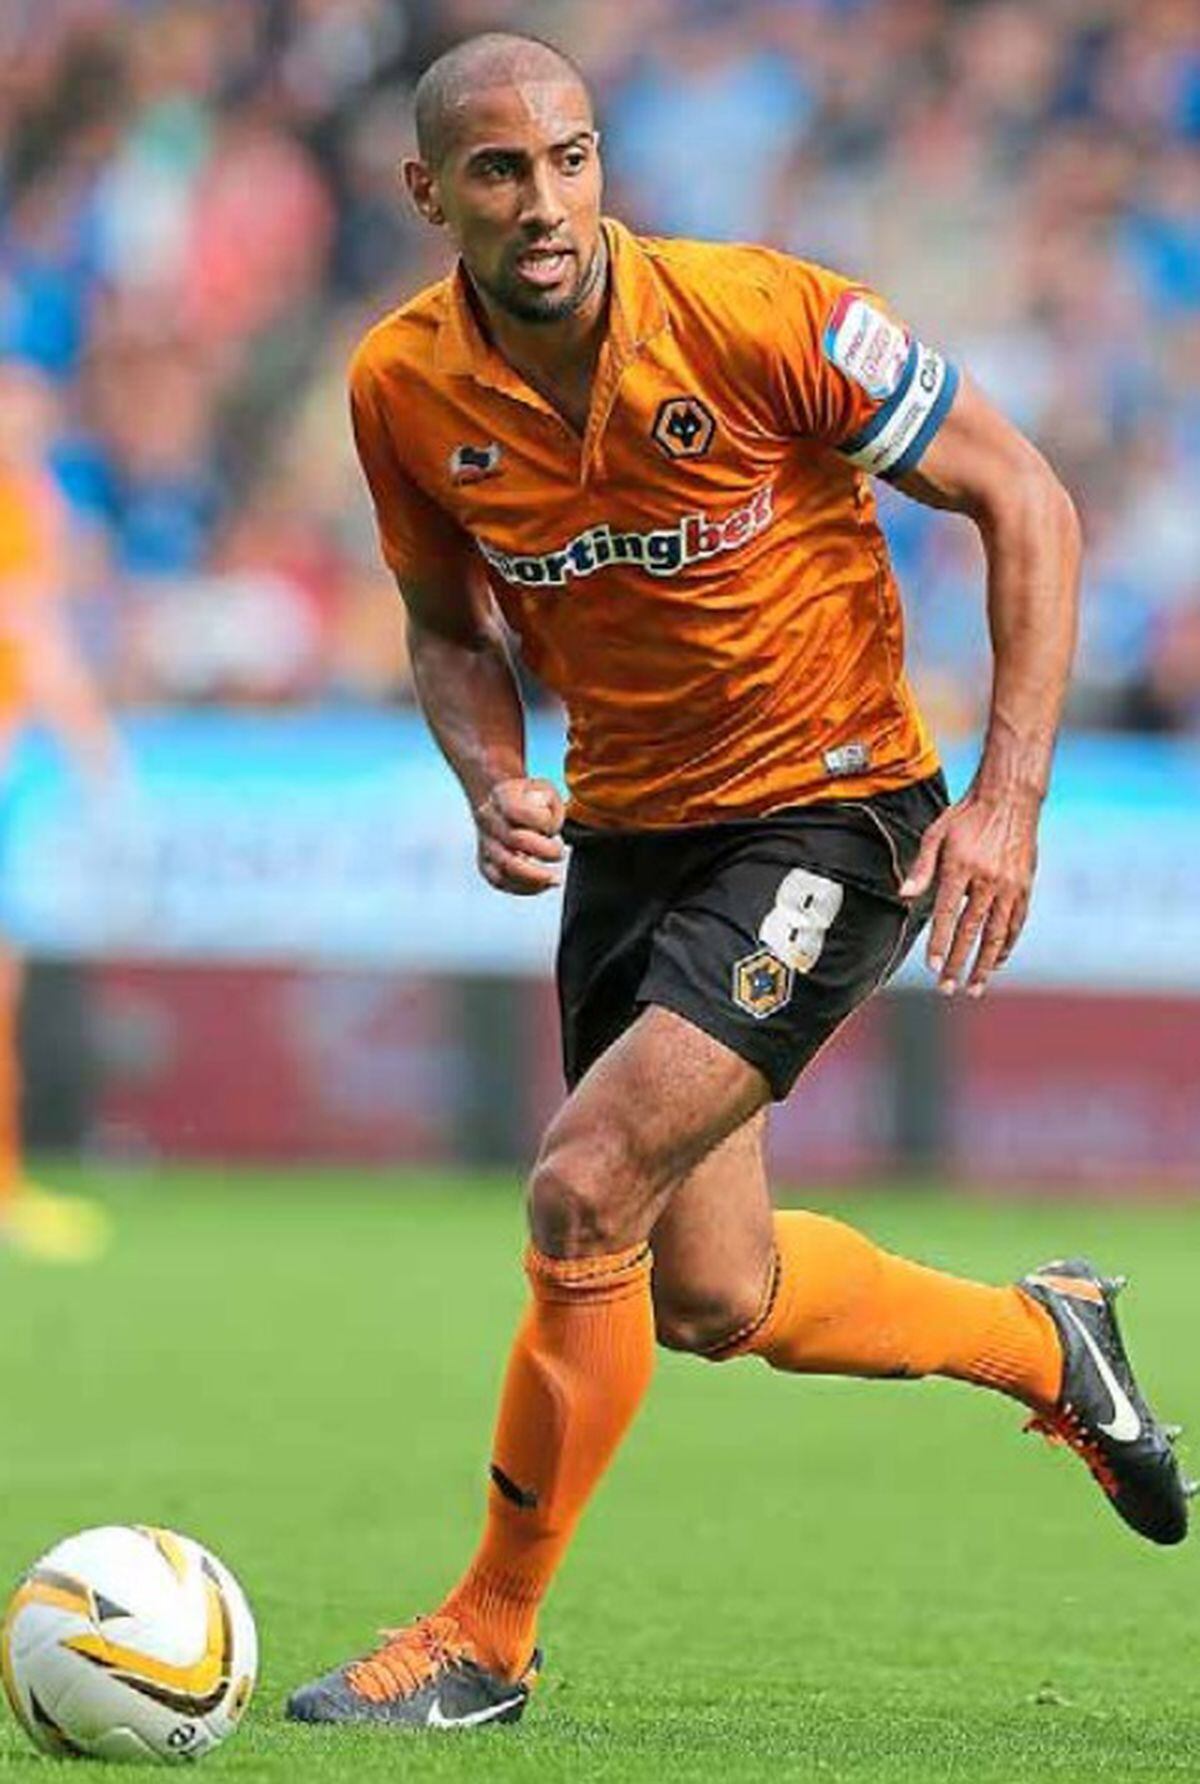 Karl Henry was back as captain of Wolves after signing a new contract